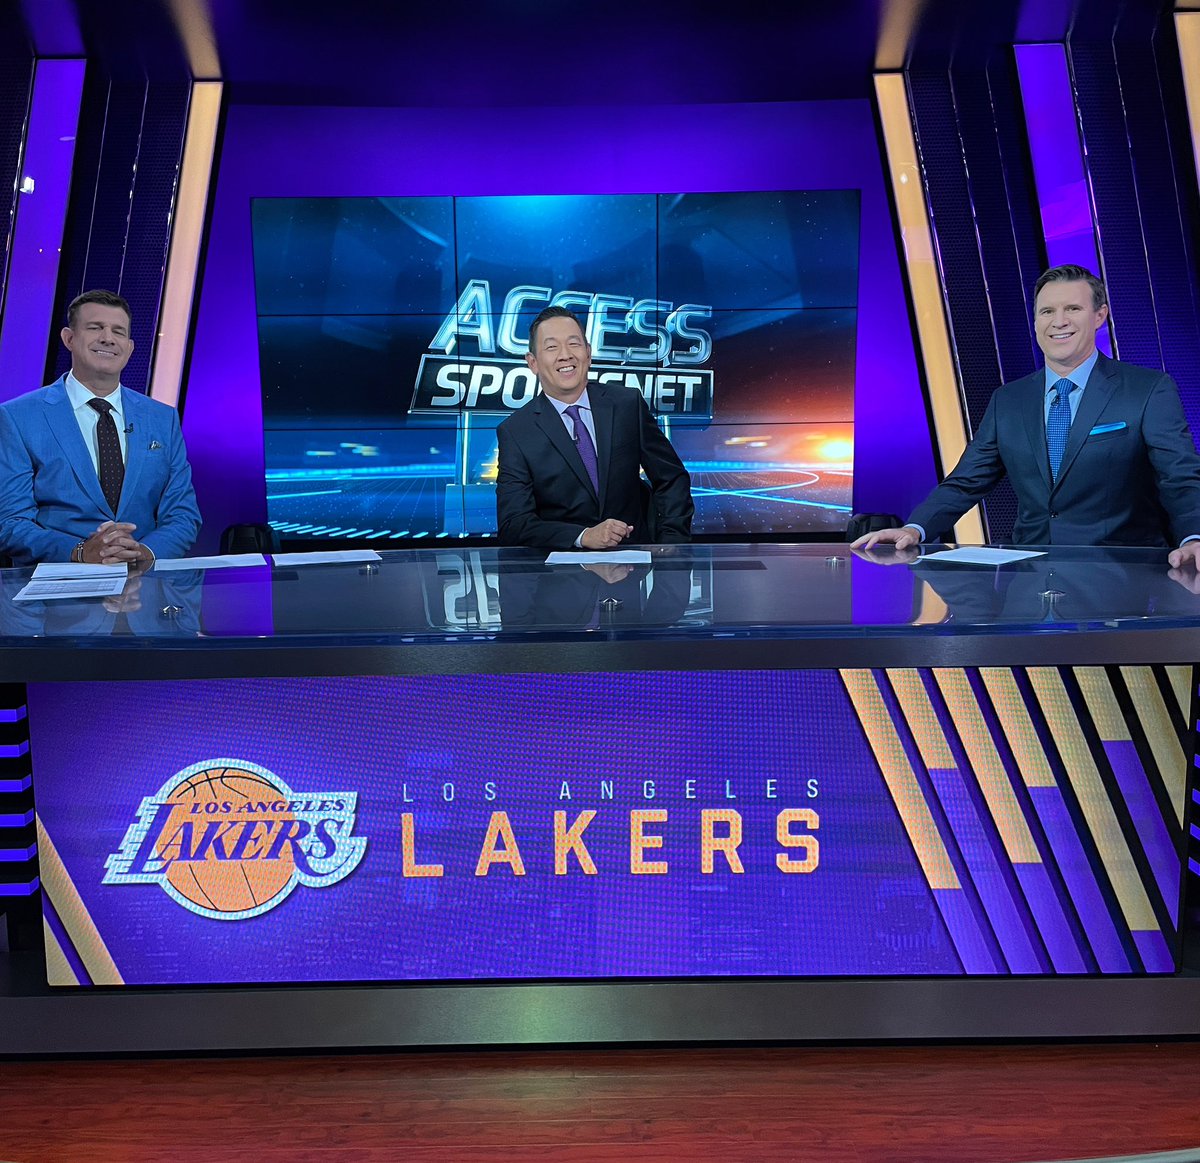 On @SpectrumSN now with @geeter3 and @Mike_Bresnahan … within a month of training camp!